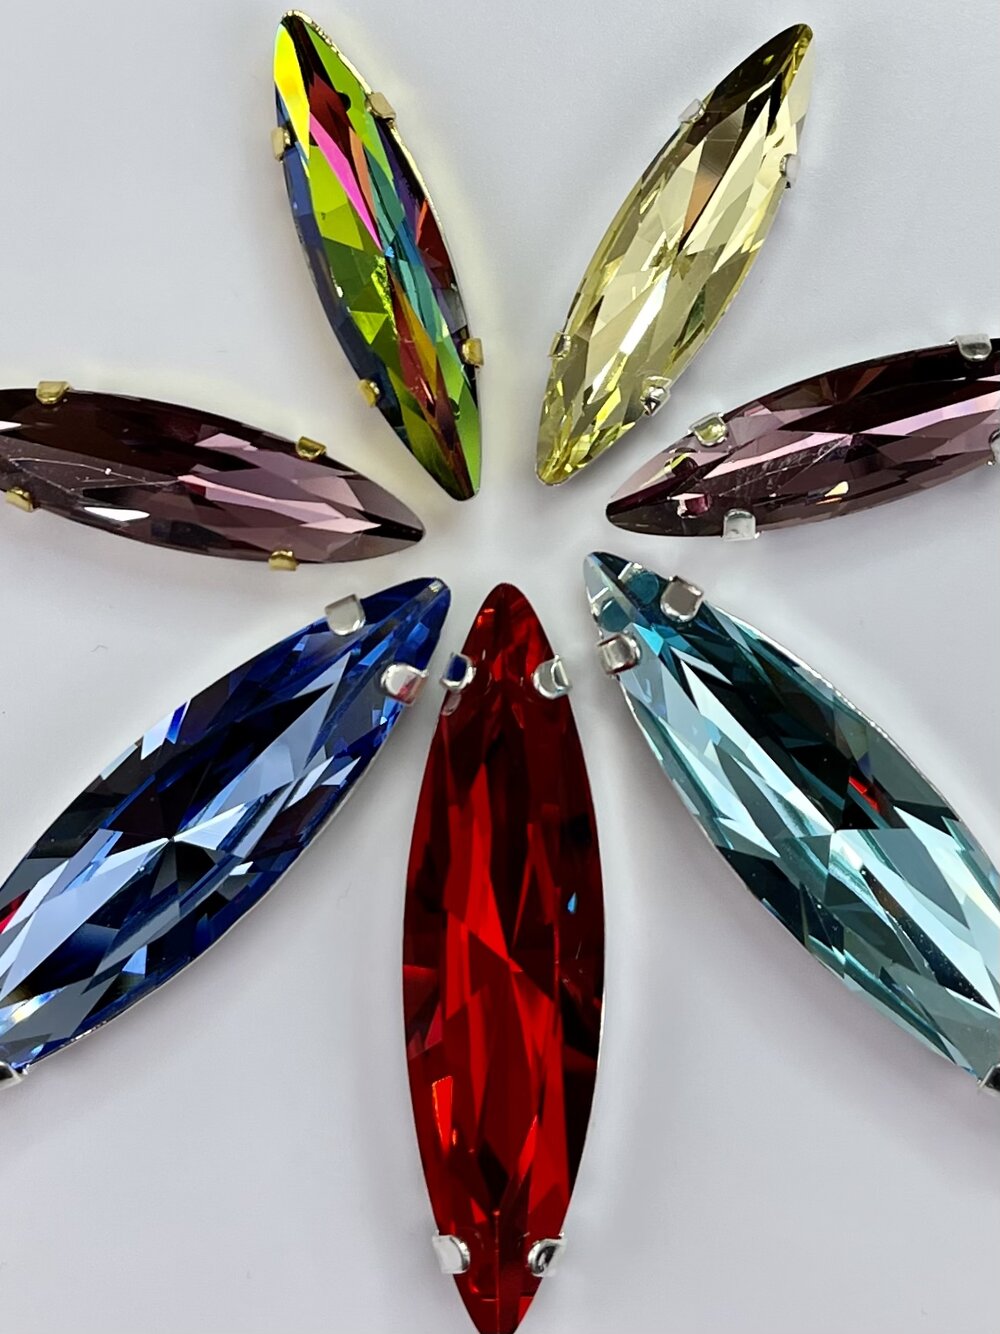 Looking Glass Gems